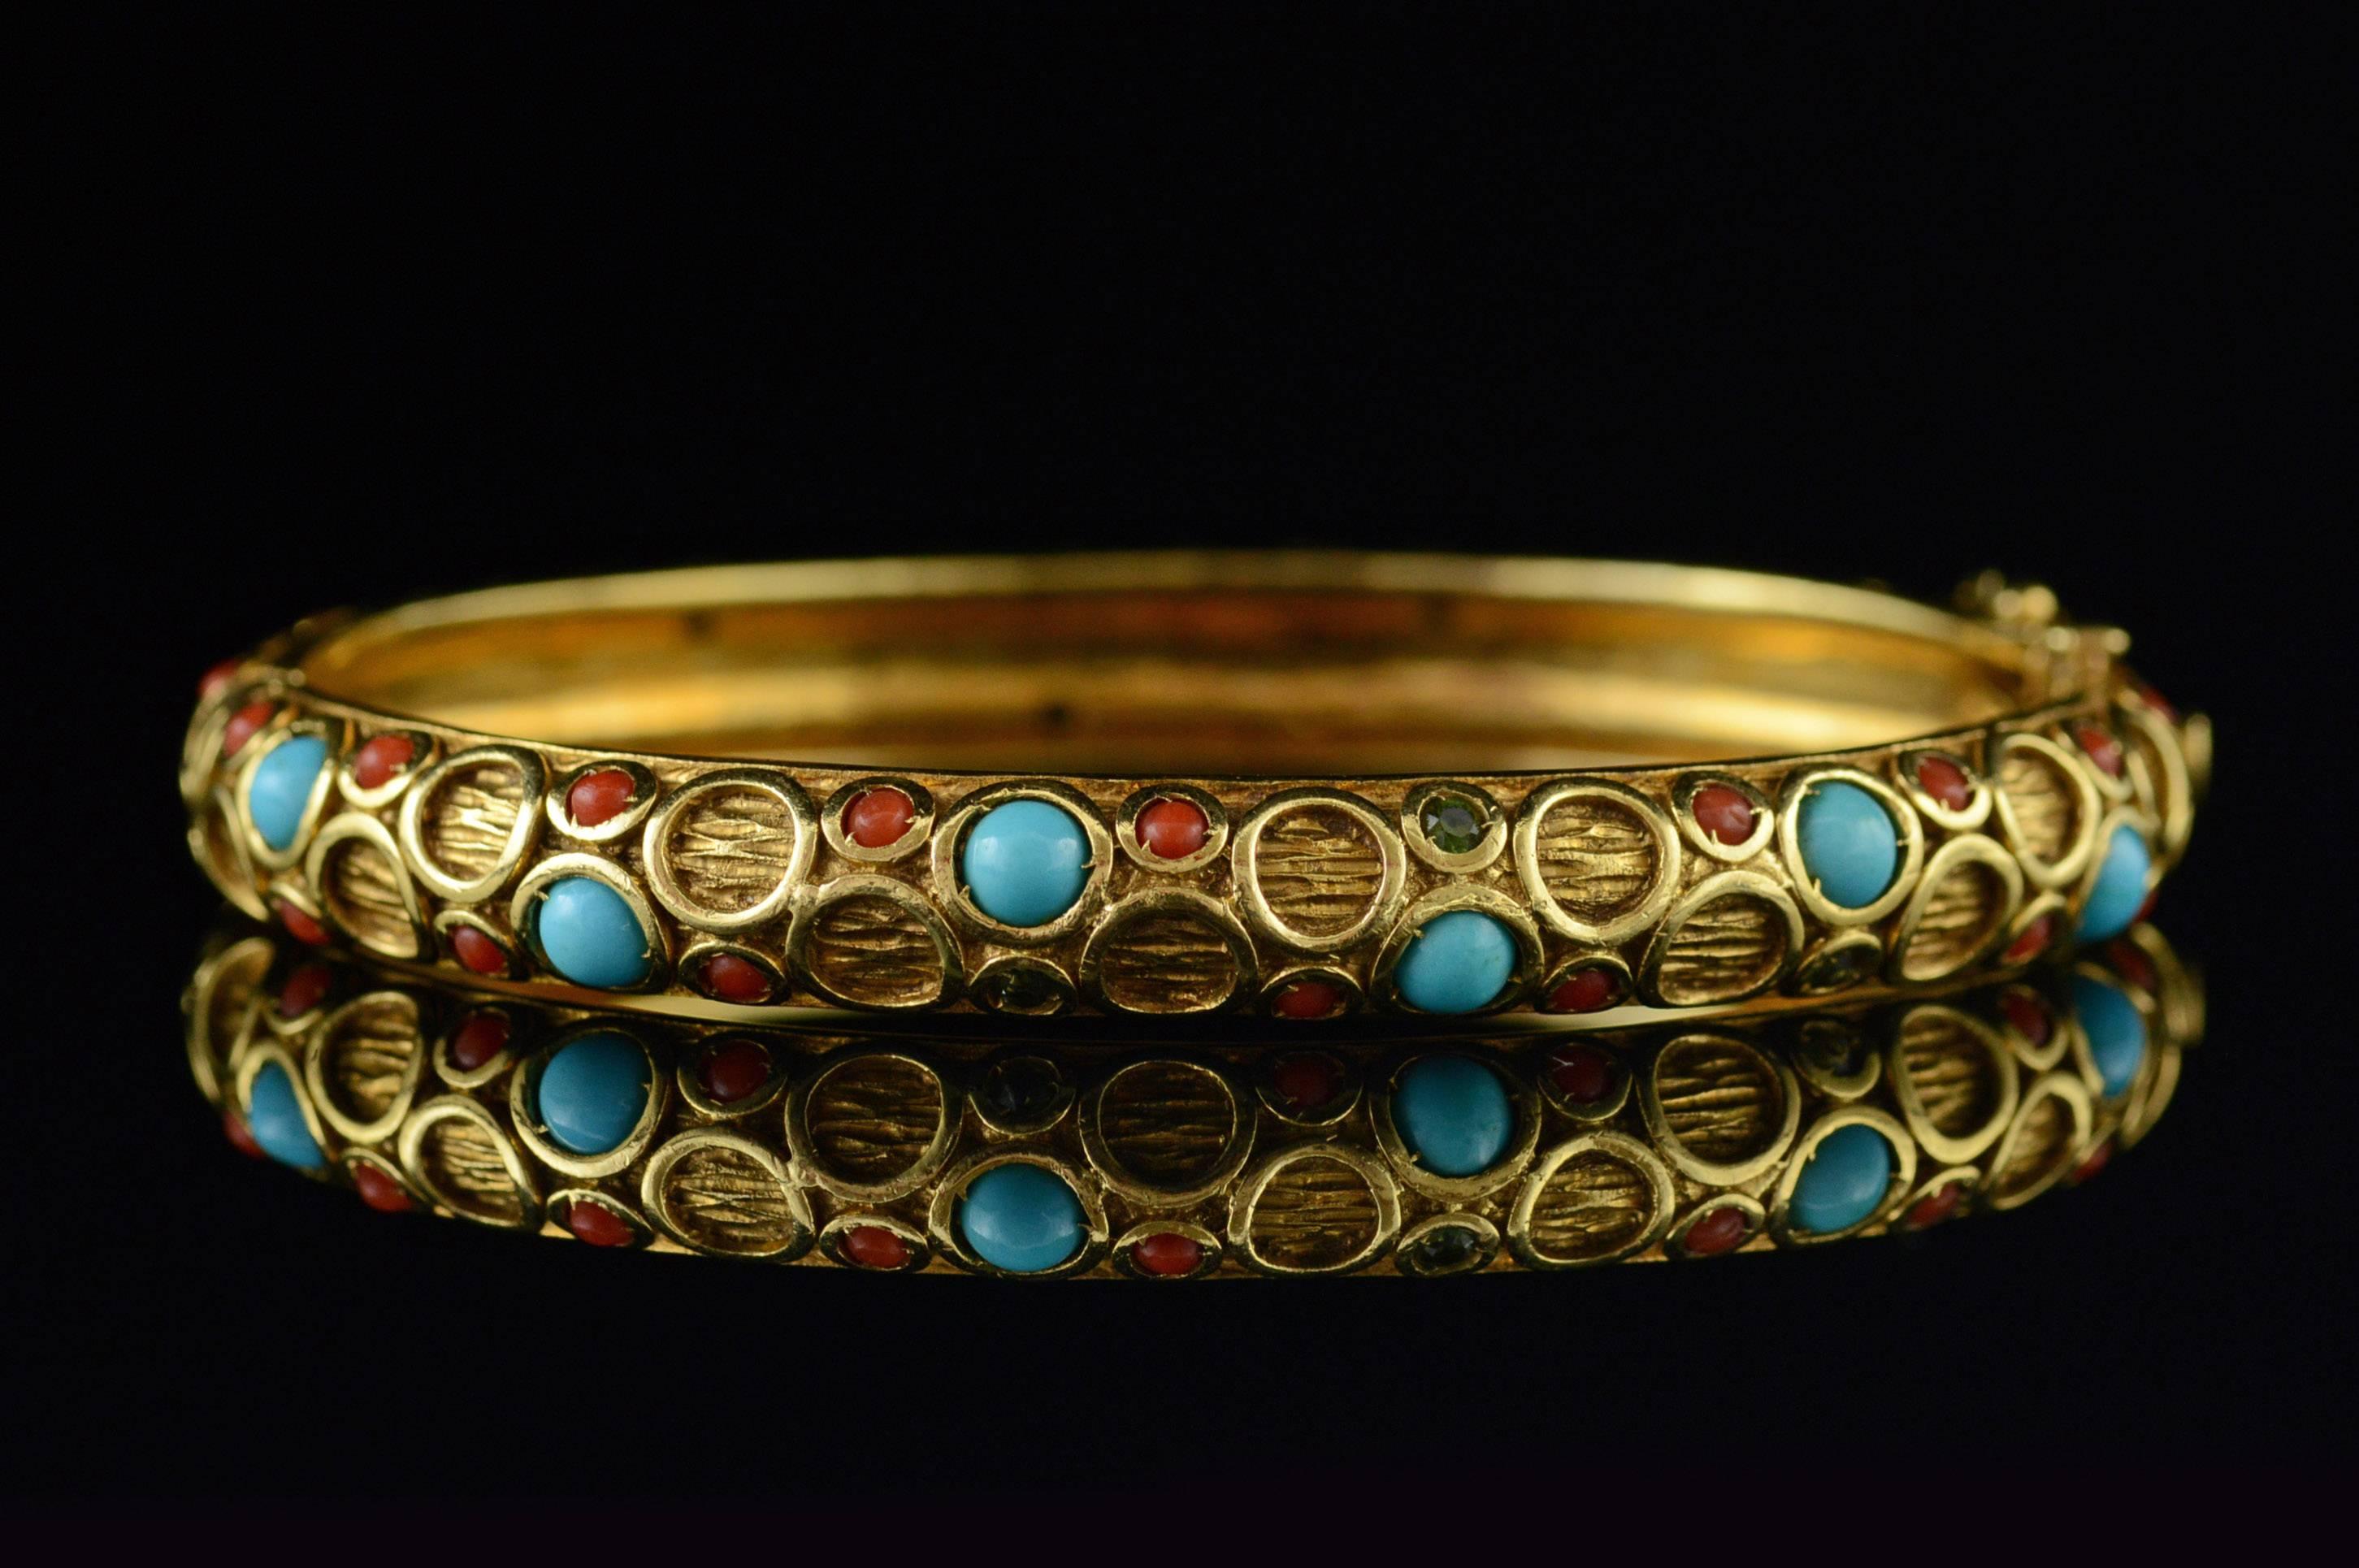 ·Item: 18K Coral & Turquoise Circle Bangle Bracelet 2.25" Yellow Gold

·Era: Modern / 1970s

·Composition: 18k Gold Marked / Tested

·Gem Stone: Cabochon Turquoise & Coral  

·Weight: 28.9g